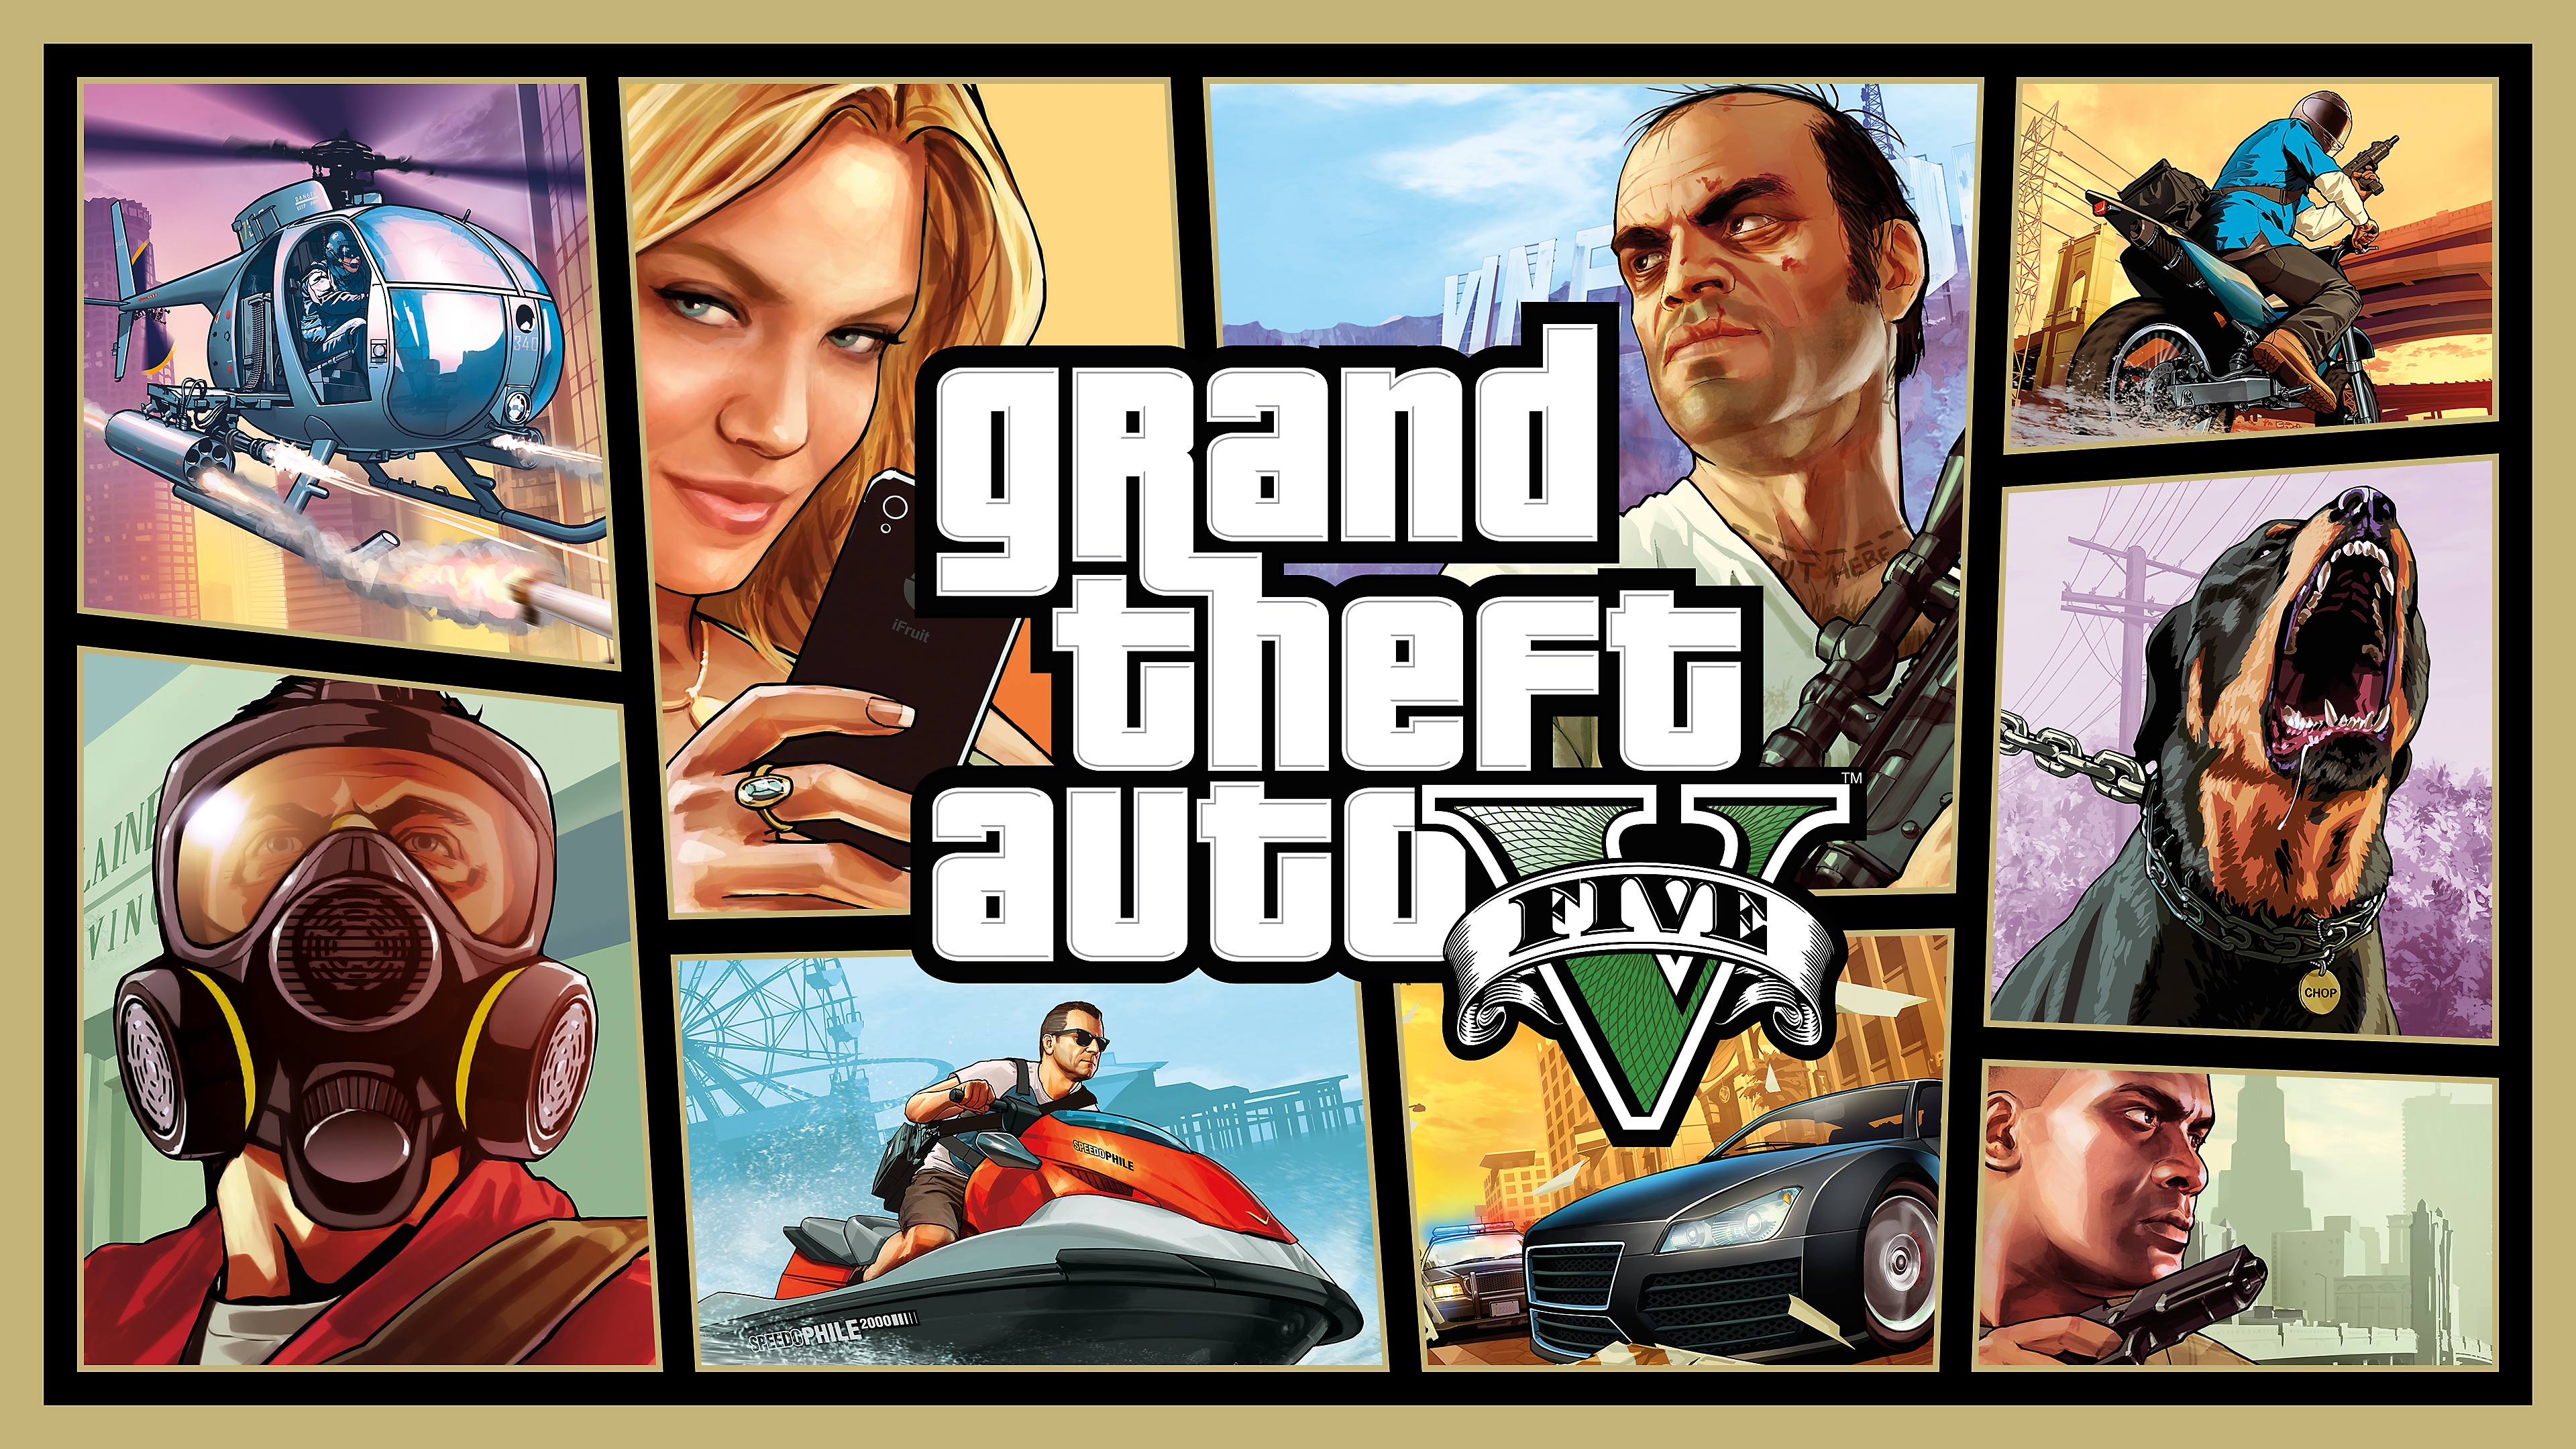 GTAV Story Mode keyart showing montage of images including the main characters, a barking Rottweiler, a Jetski, cars and a helicopter.